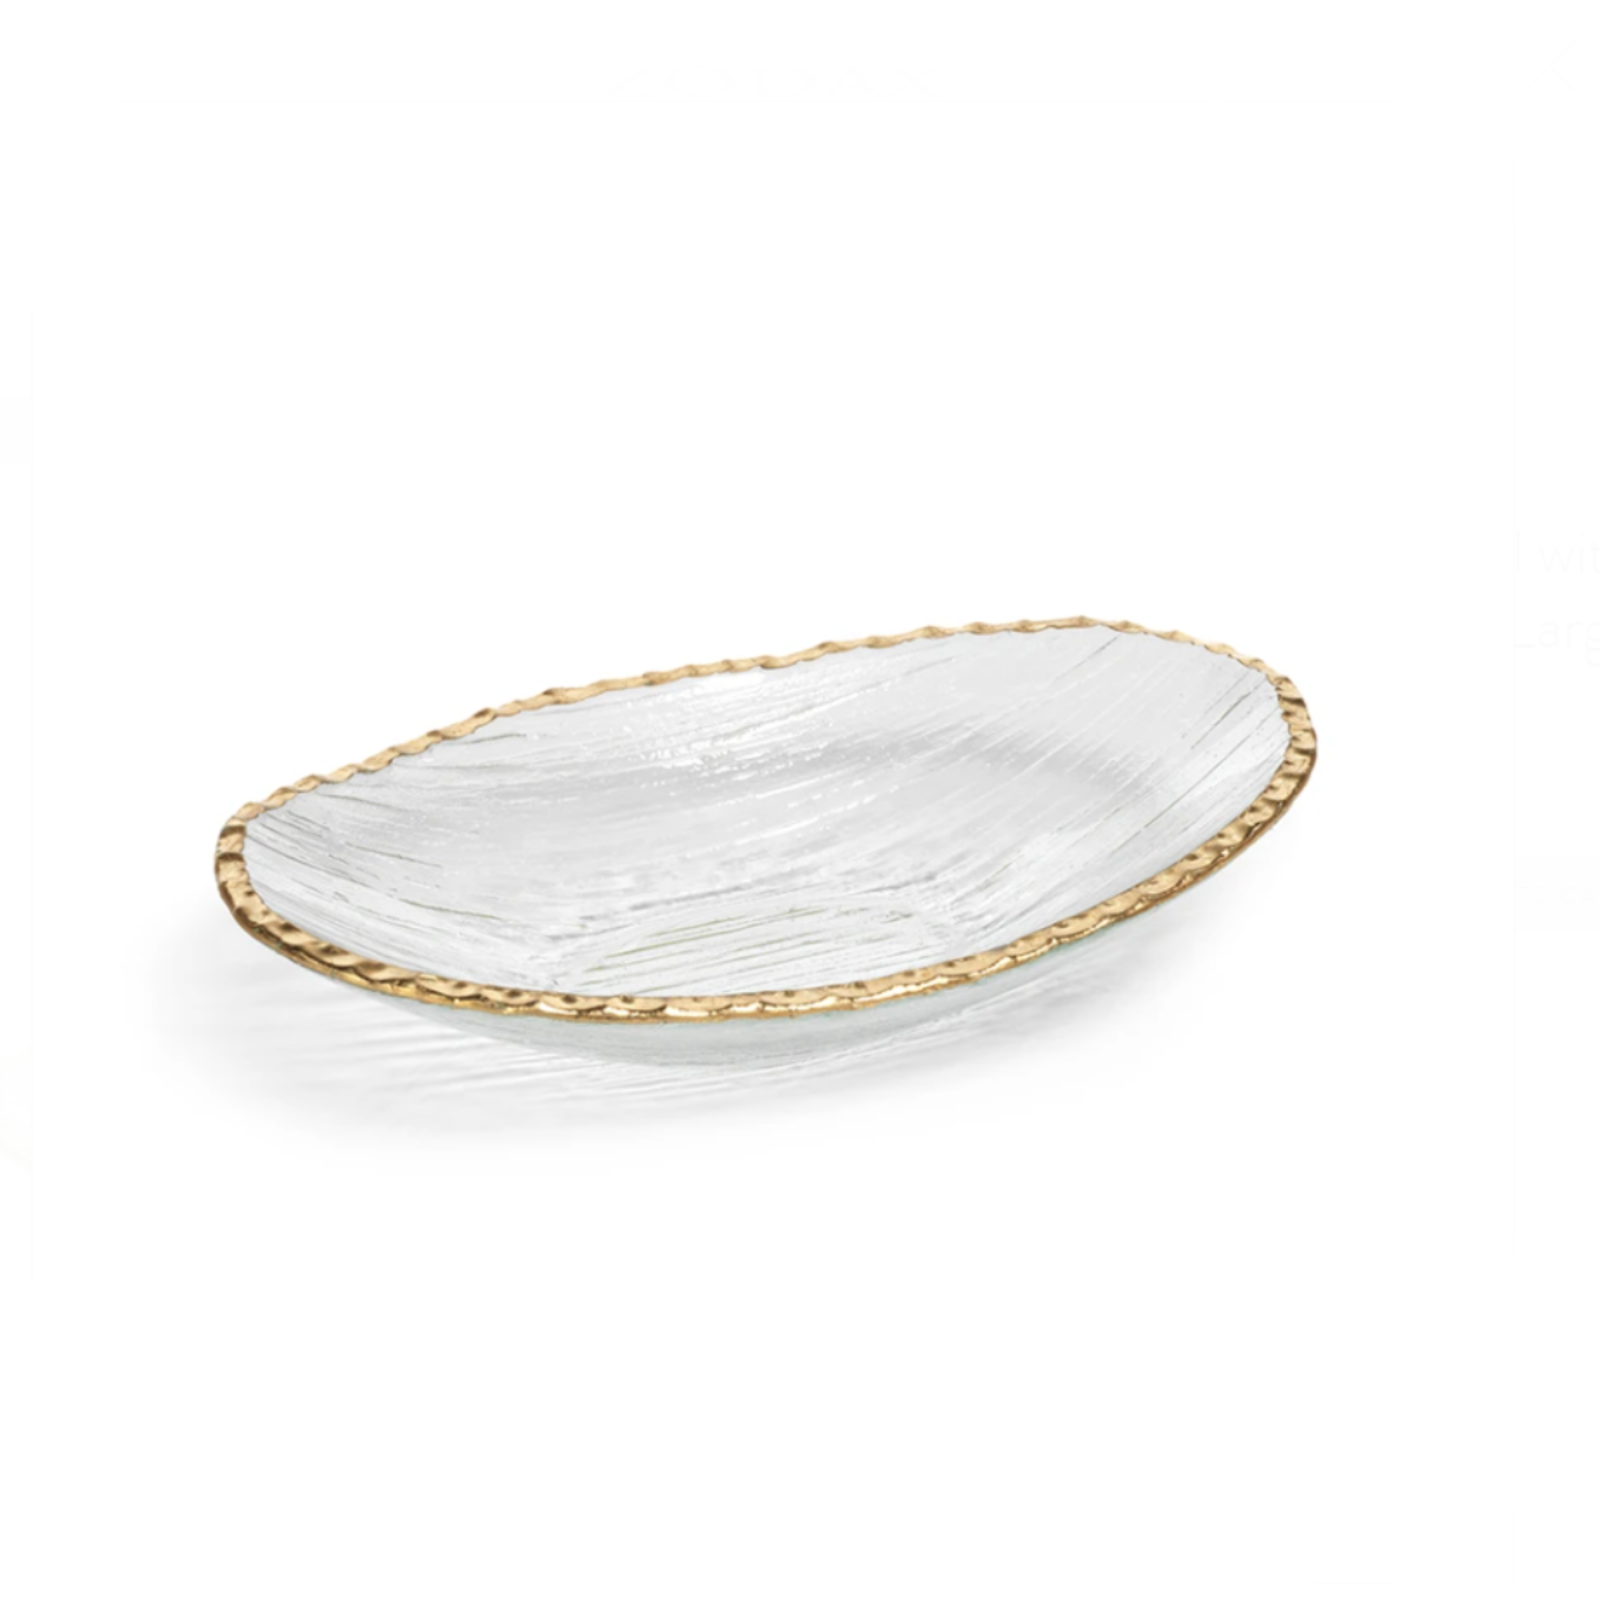 Zodax Clear Textured Bowl with Jagged Gold Small CH-5763 loading=